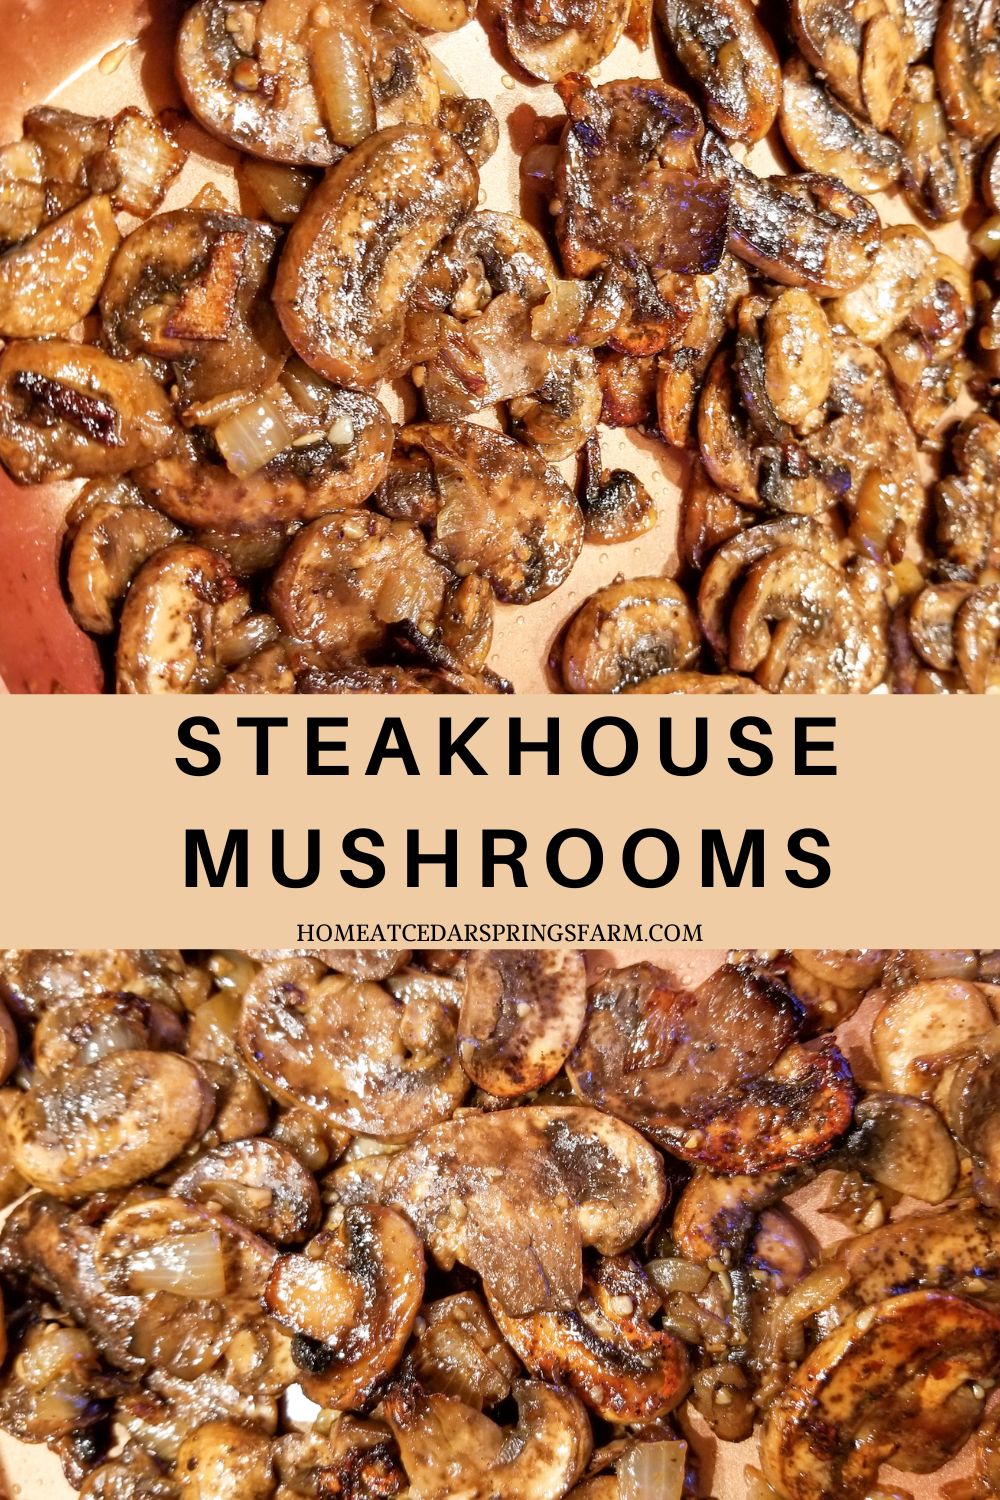 steakhouse mushrooms with overlay with text